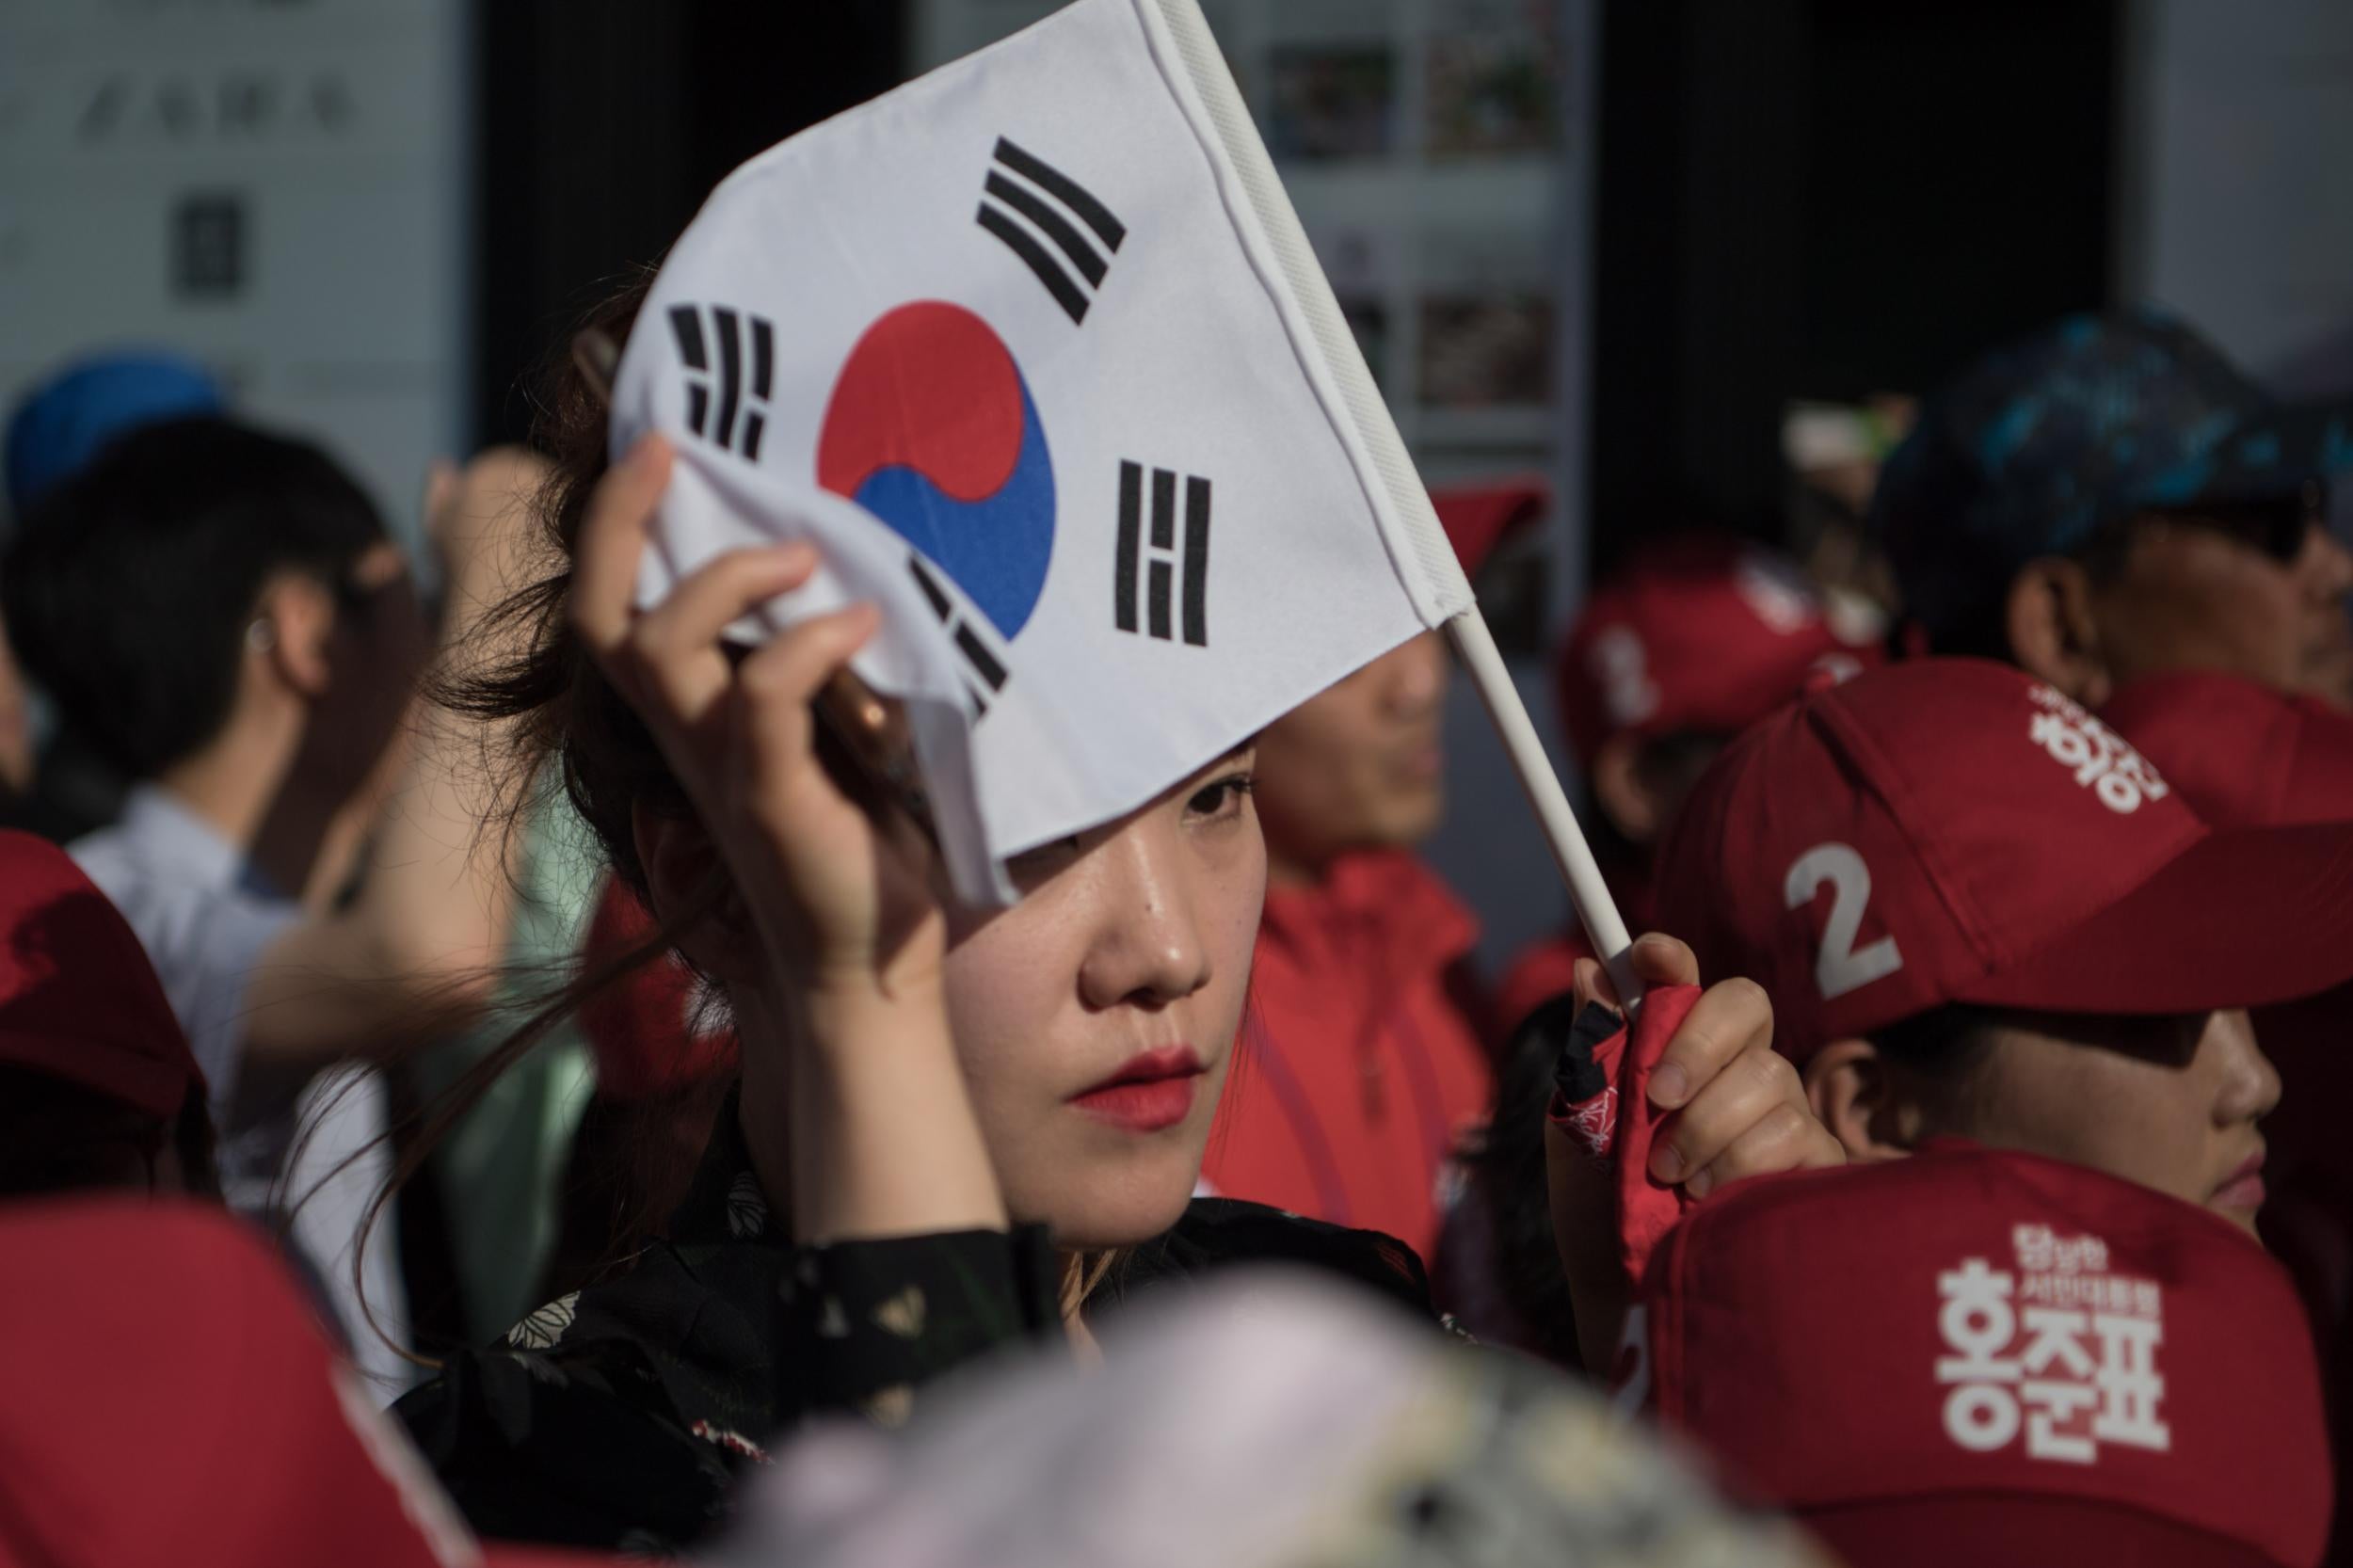 South Korea is set to vote in presidential elections on 9 May